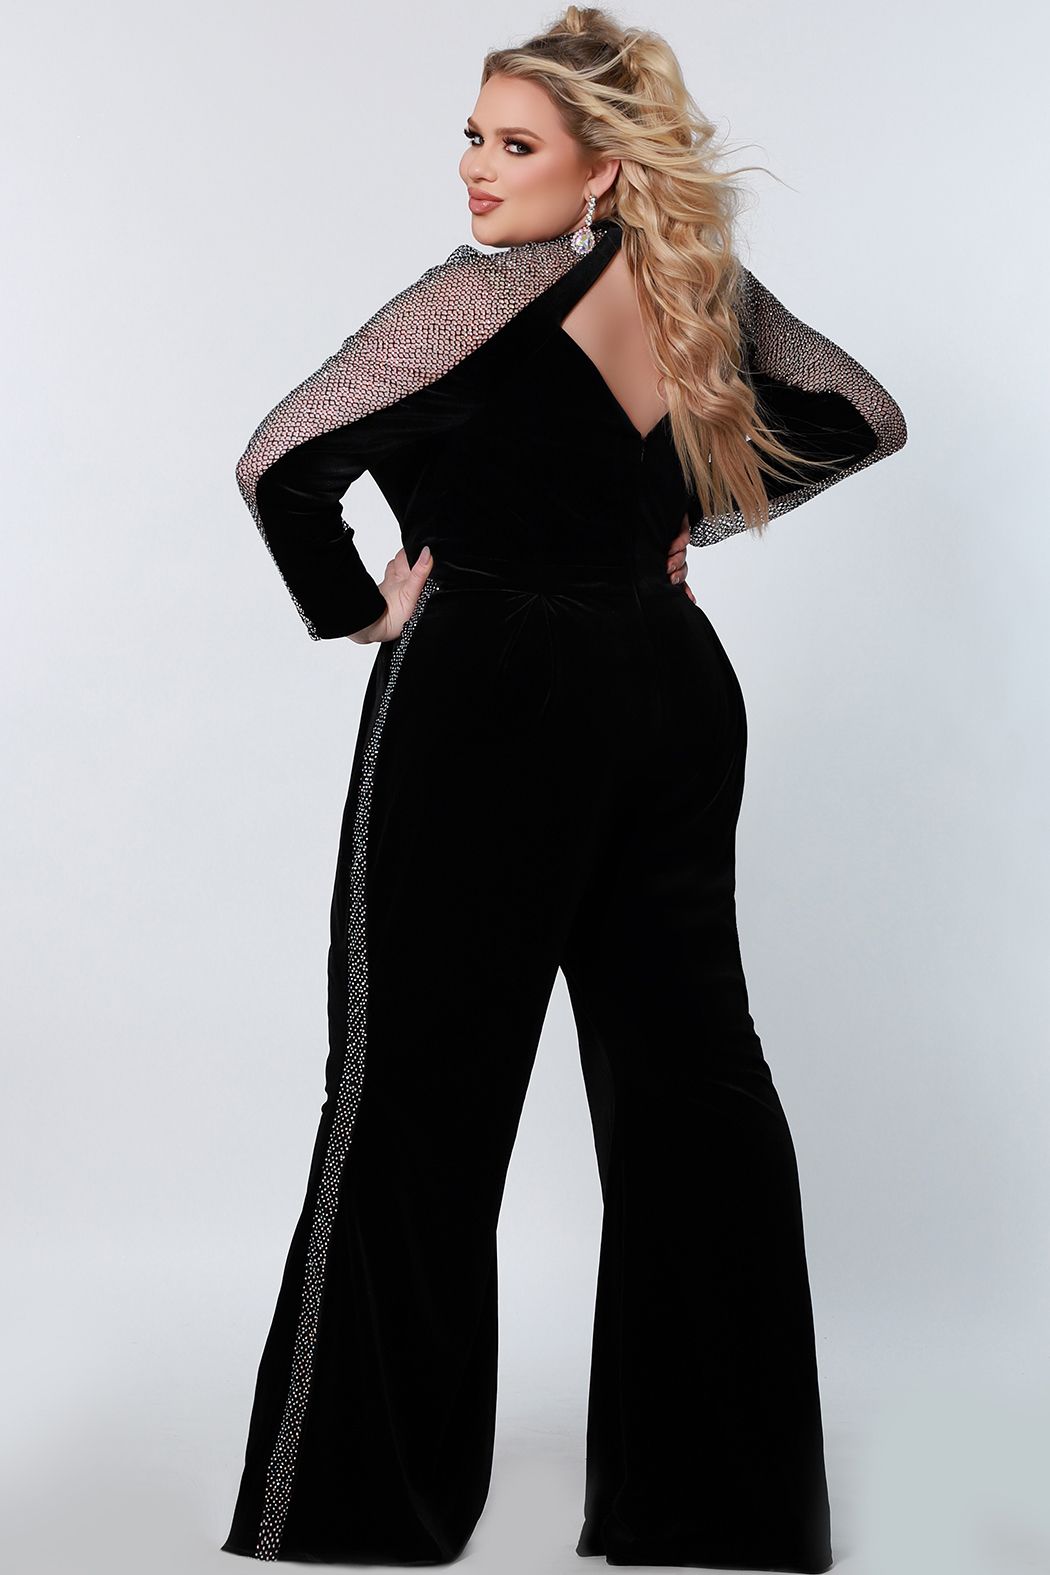 Johnathan Kayne by Sydney's Closet JK2207 You're ready to rock in the hottest jumpsuit of the season! In shade black Caviar, this jumpsuit is a combination of black stretch velvet and stretch crystal mesh that shines without fail. The structure makes all the difference with boning, point pleats through the midsection, and bell bottom pants. Details like the diamond cutout back and crystal mesh tuxedo stripe have you ready to slay your night. JK 2207